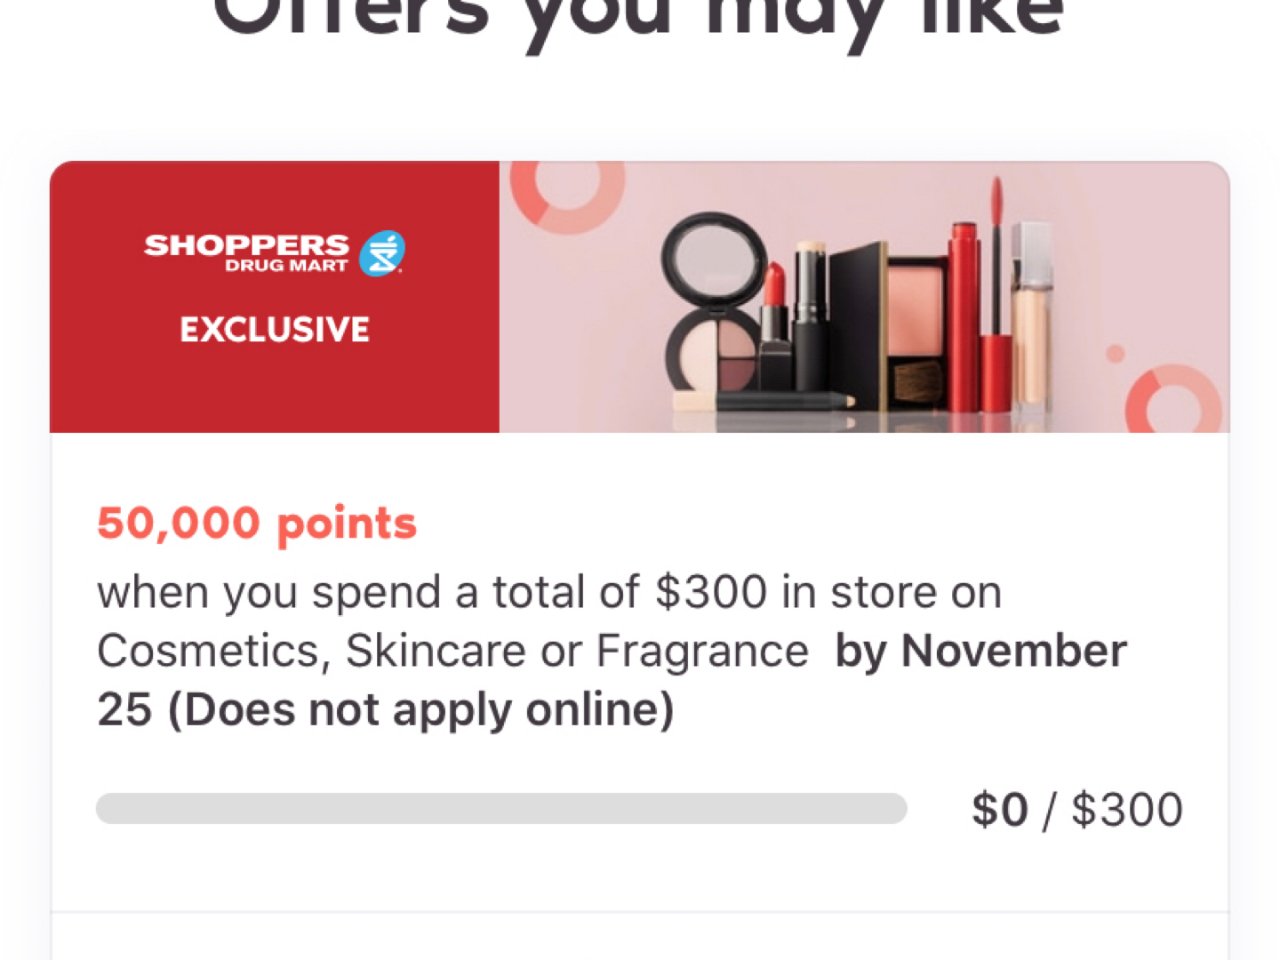 Shoppers个人offer 额外积分...